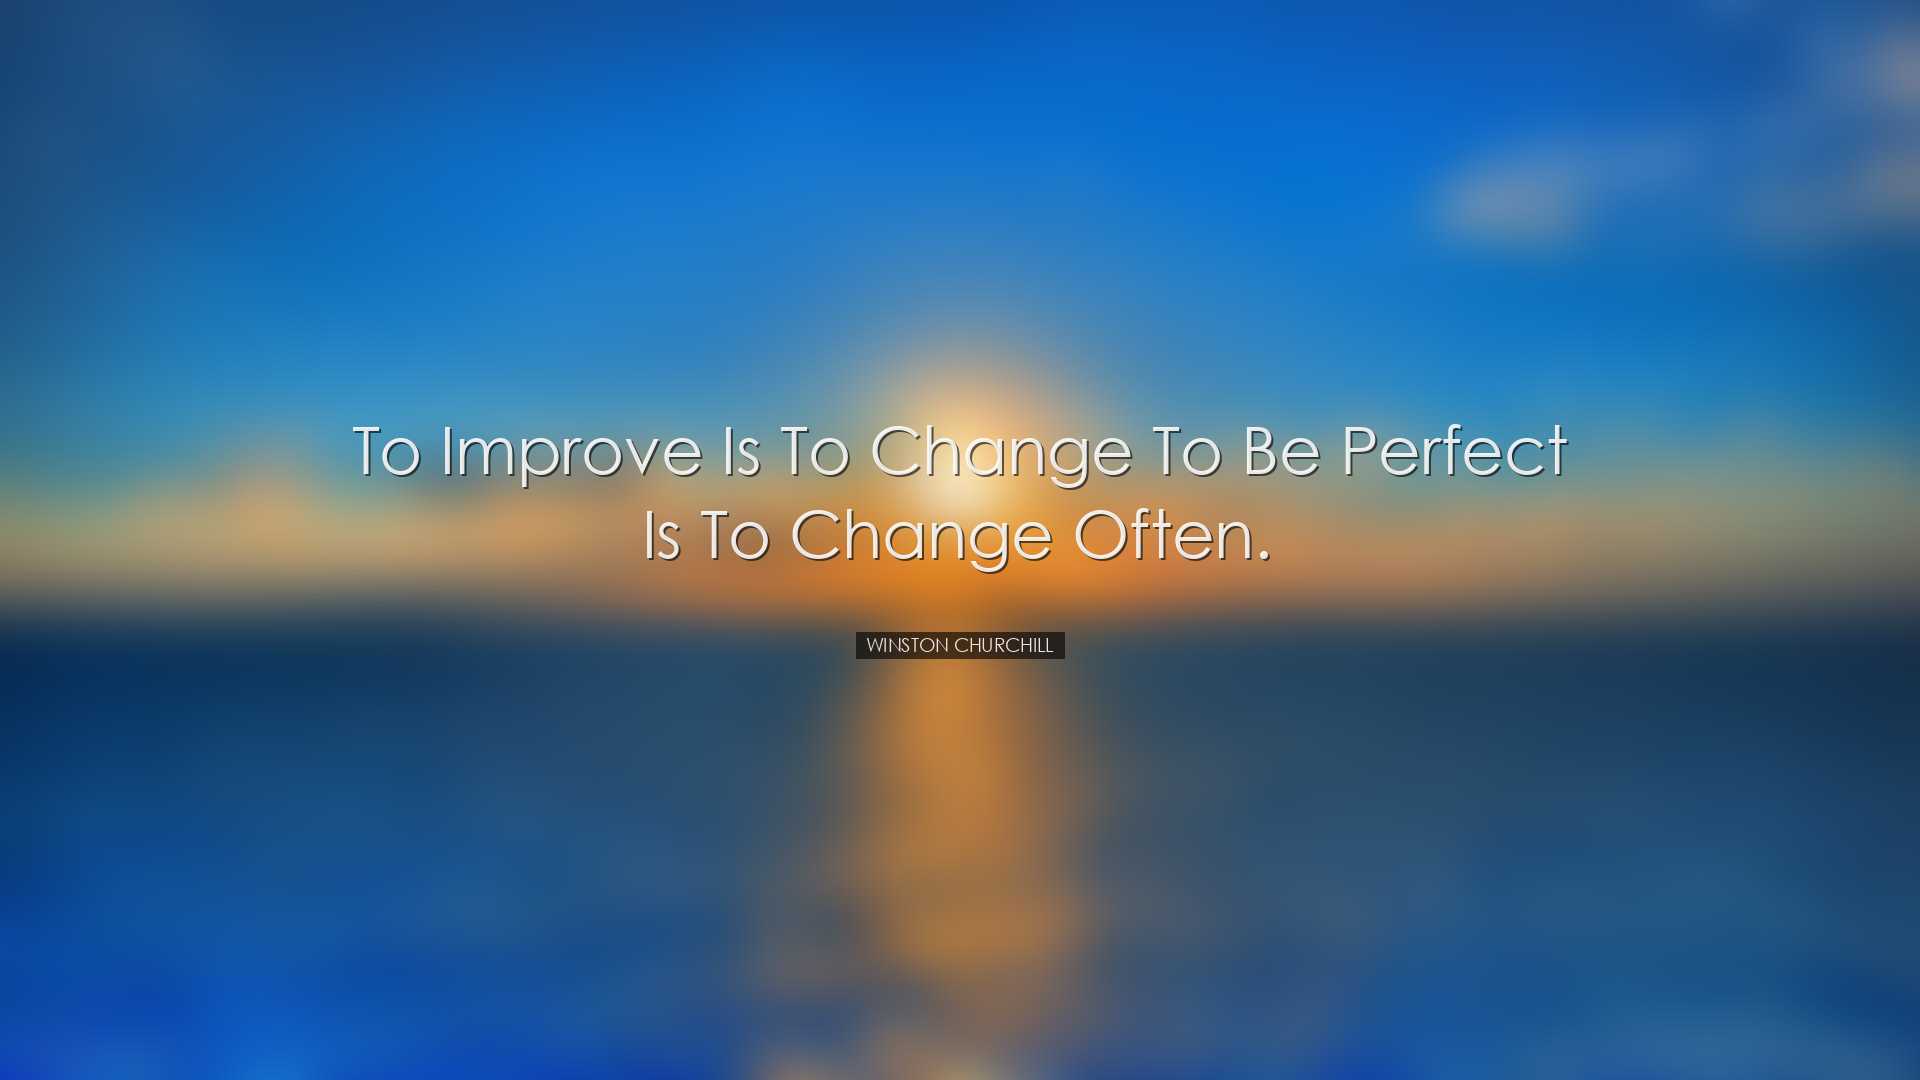 To improve is to change to be perfect is to change often. - Winsto